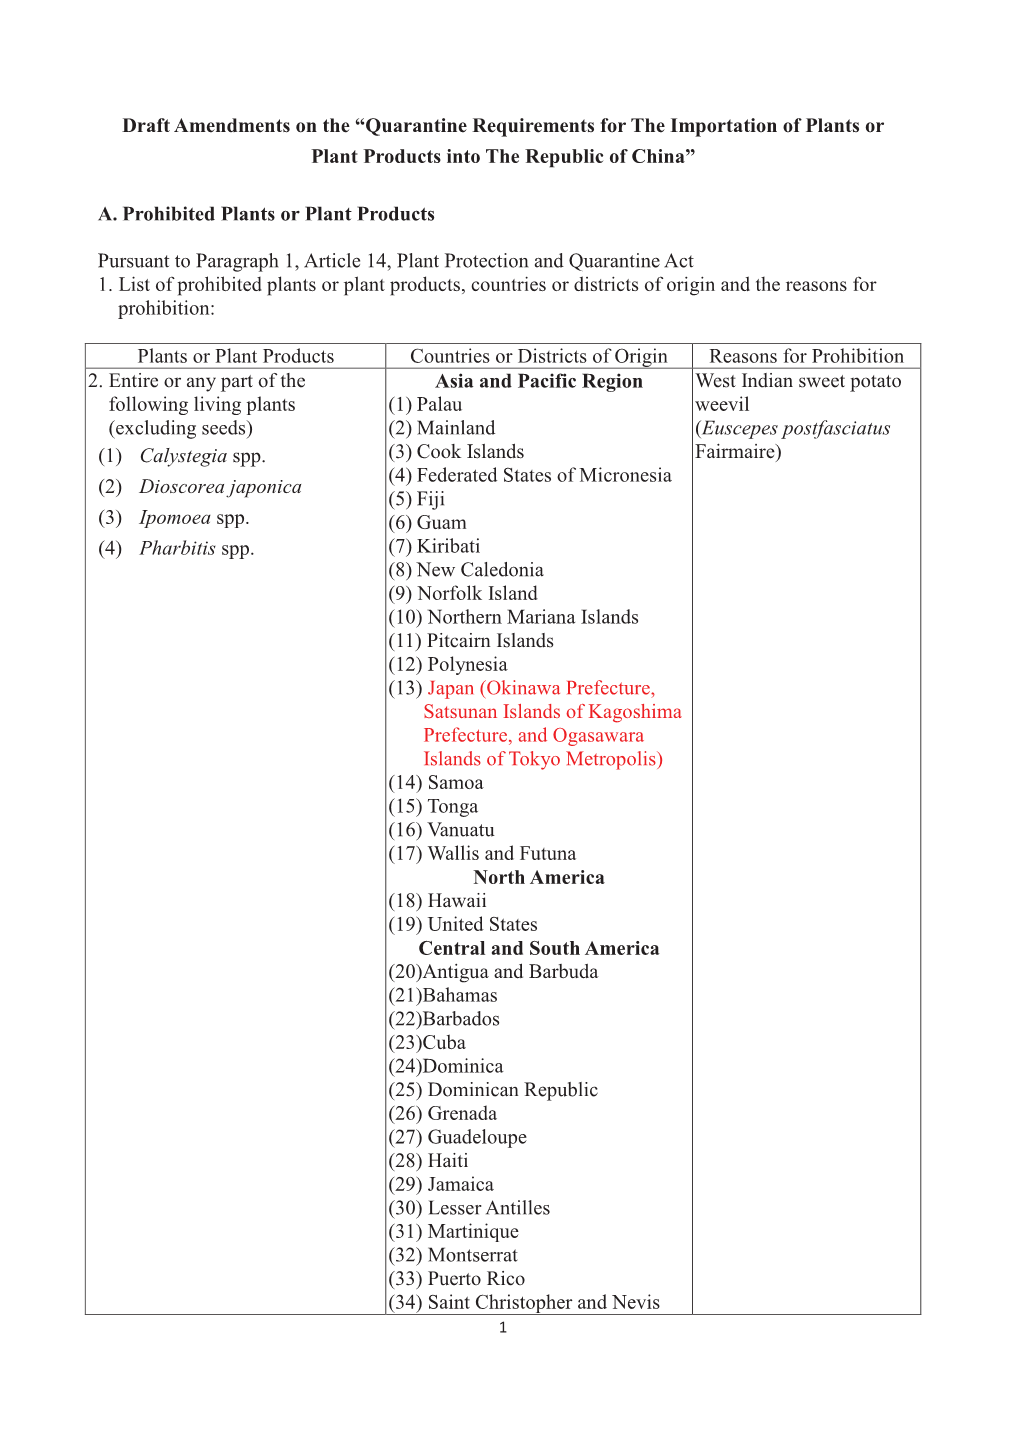 Quarantine Requirements for the Importation of Plants Or Plant Products Into the Republic of China”